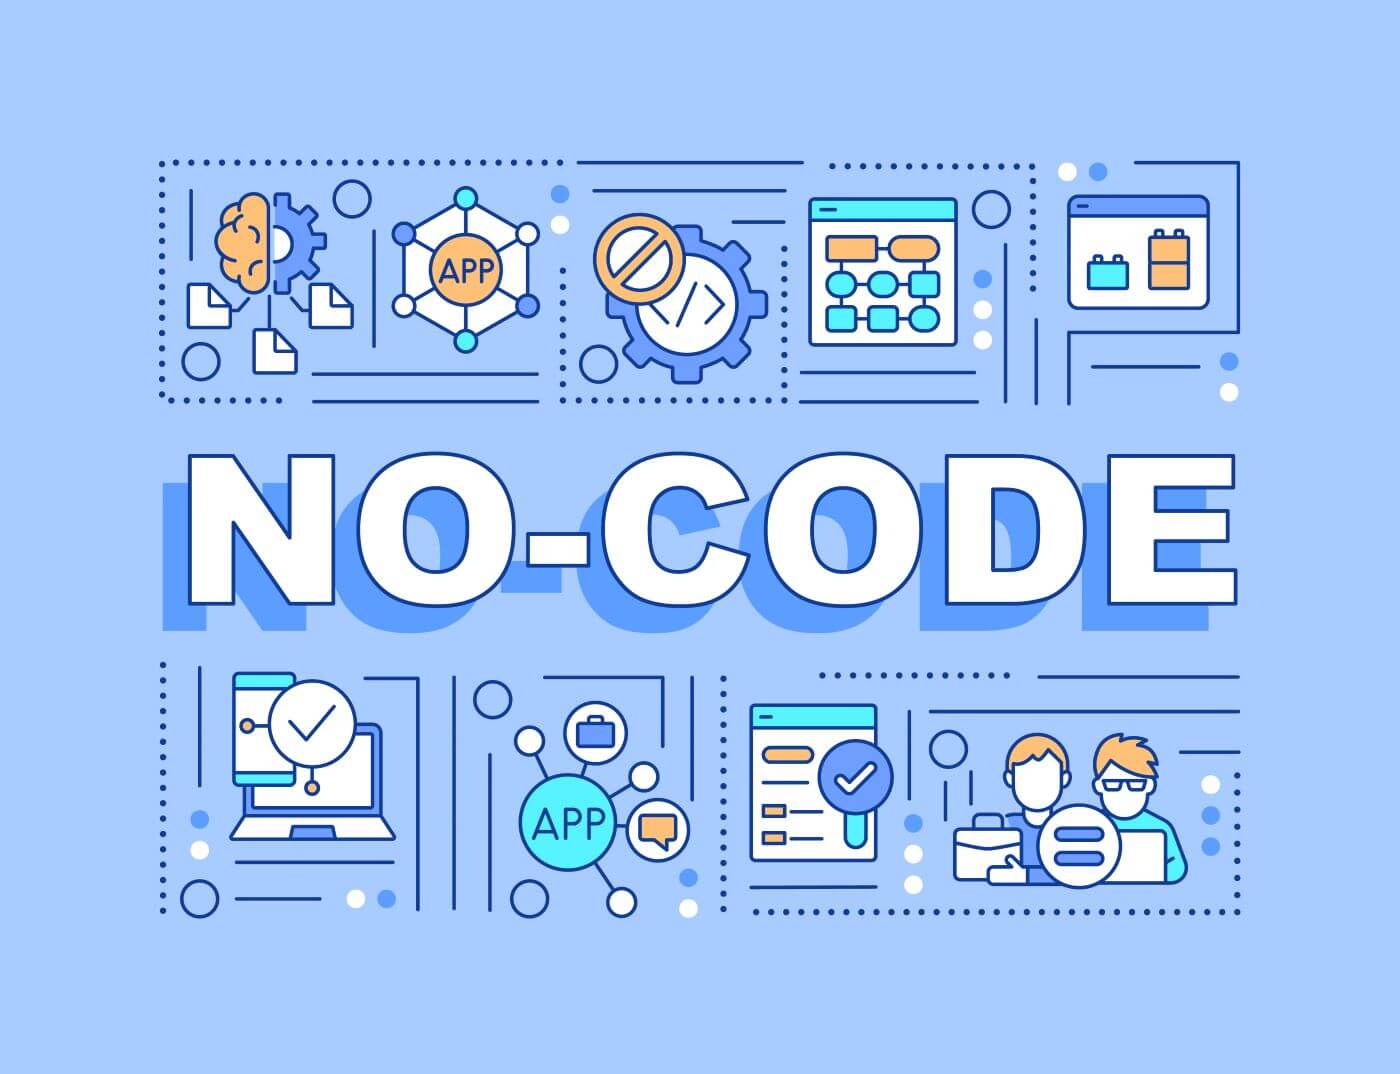 No-code word concept blue banner- Web 3.0 solutions for building AR apps